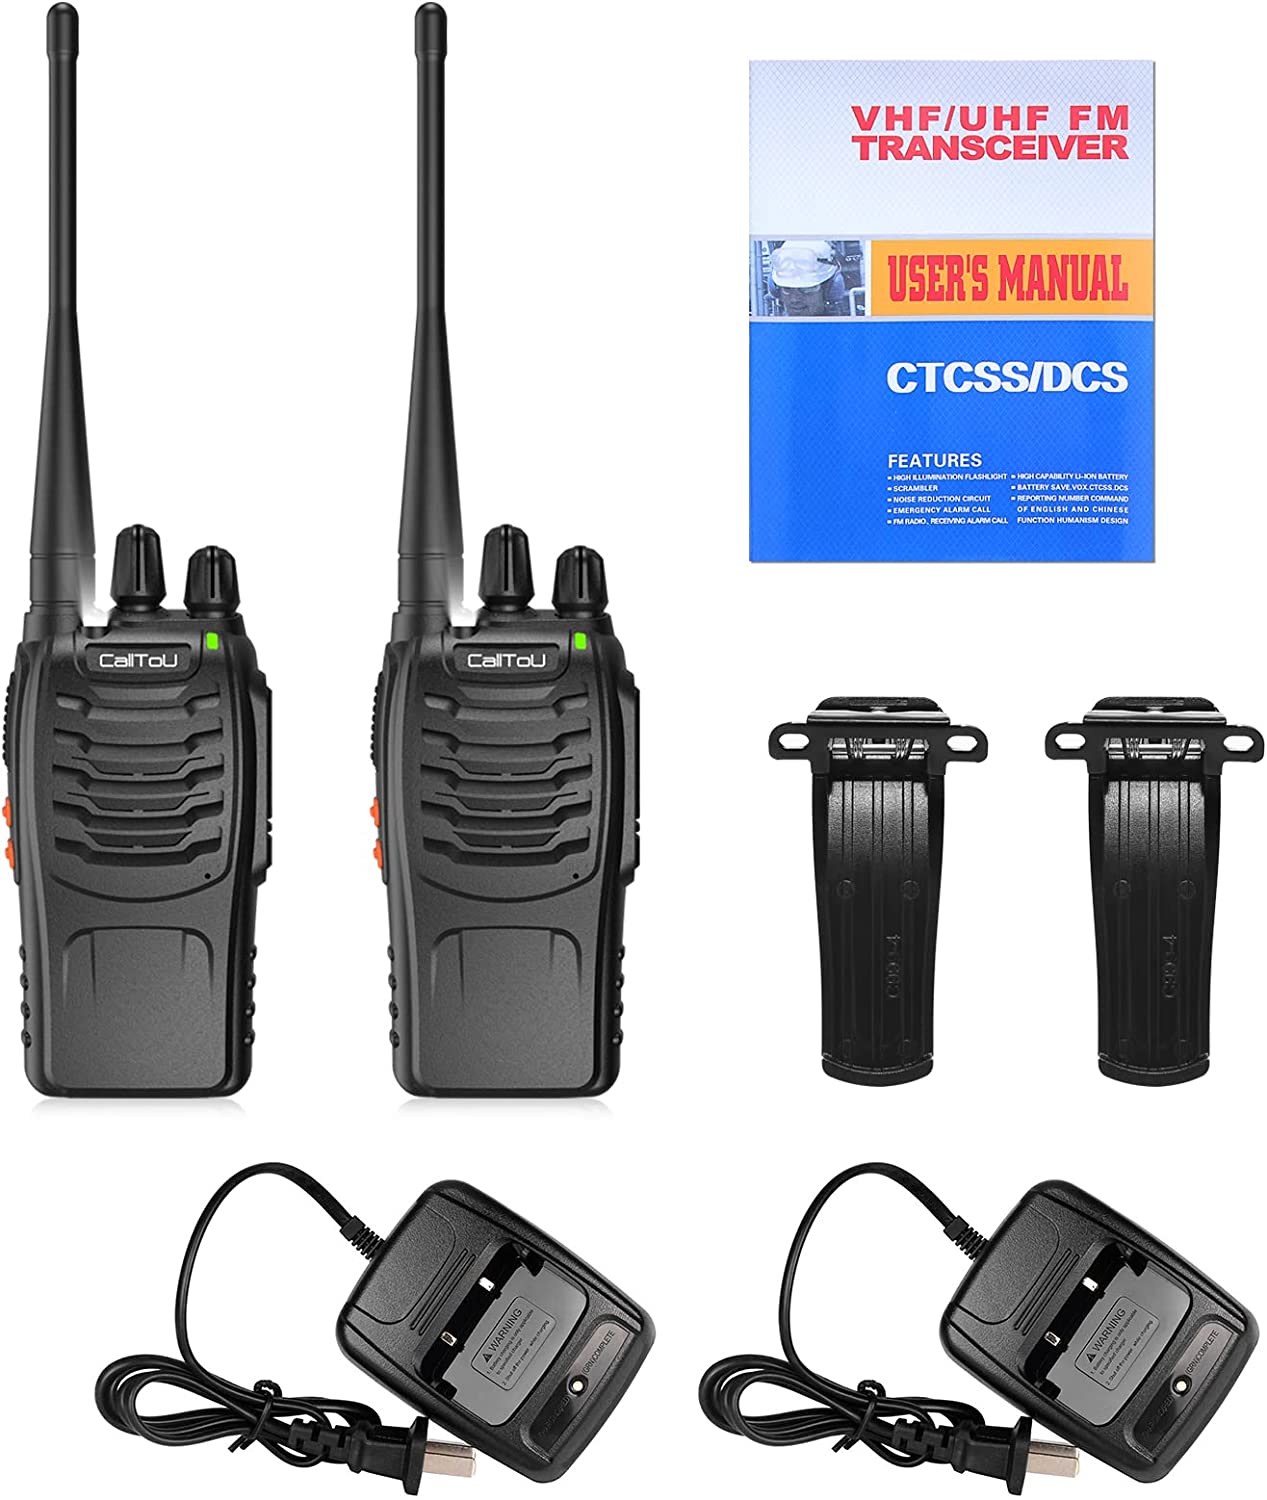  Baofeng Walkie Talkies bf-888s Long Range Two-Way Radios for  Adults Rechargeable Handheld Interphone Professional UHF Communicator 3  Pack Walky Talky Set with Earpiece,Li-ion Battery and Charger : Electronics